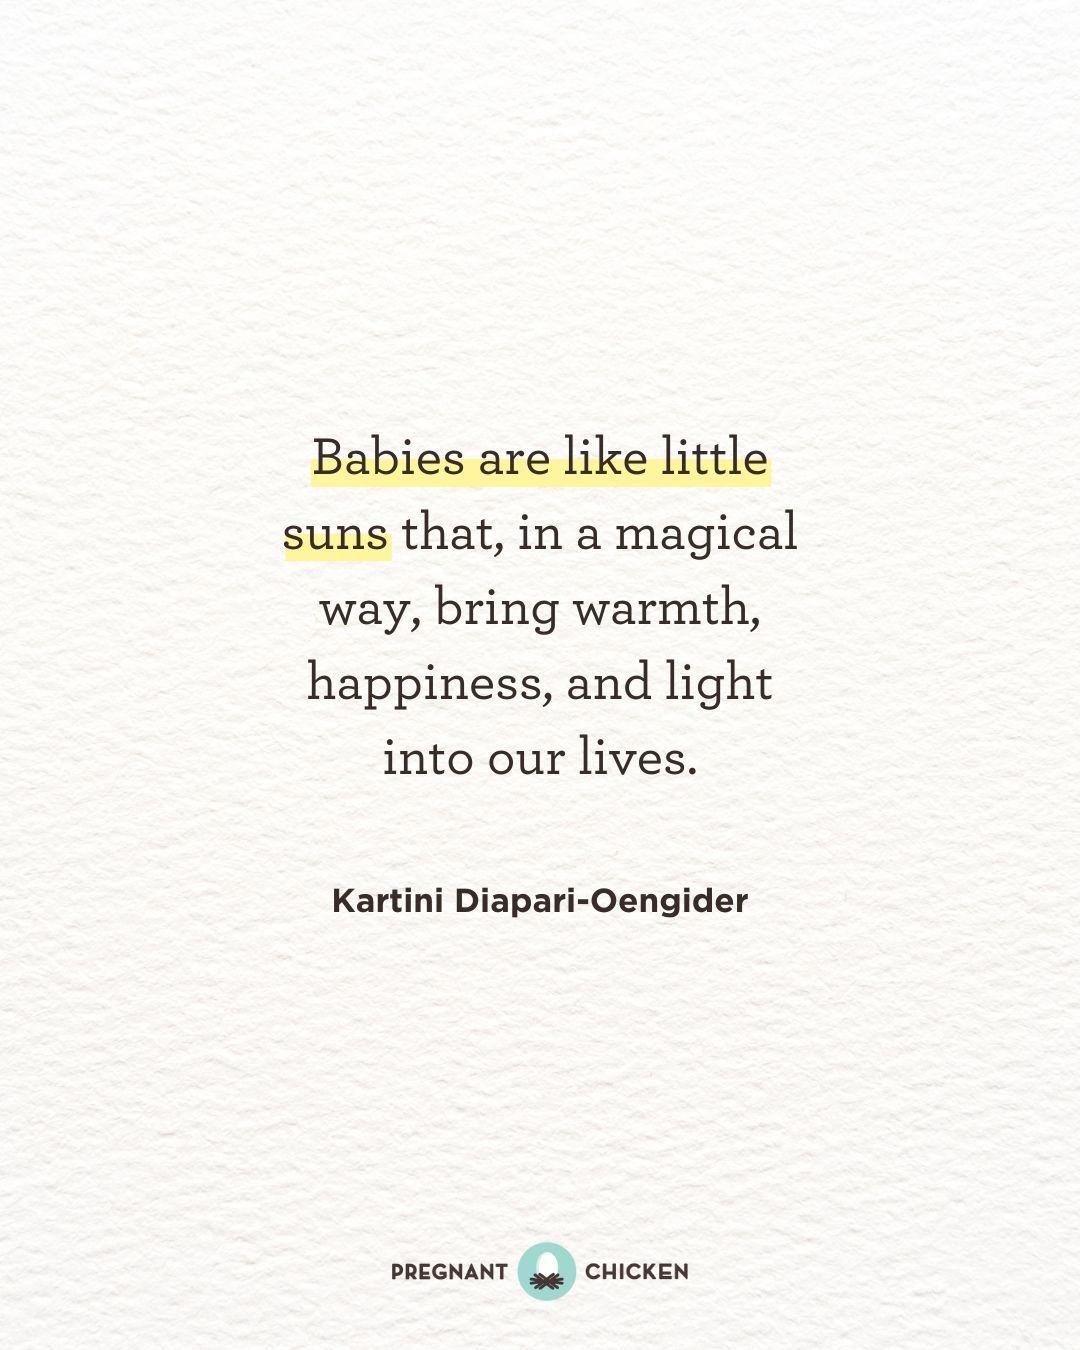 Babies are like little suns that, in a magical way, bring warmth, happiness, and light into our lives.